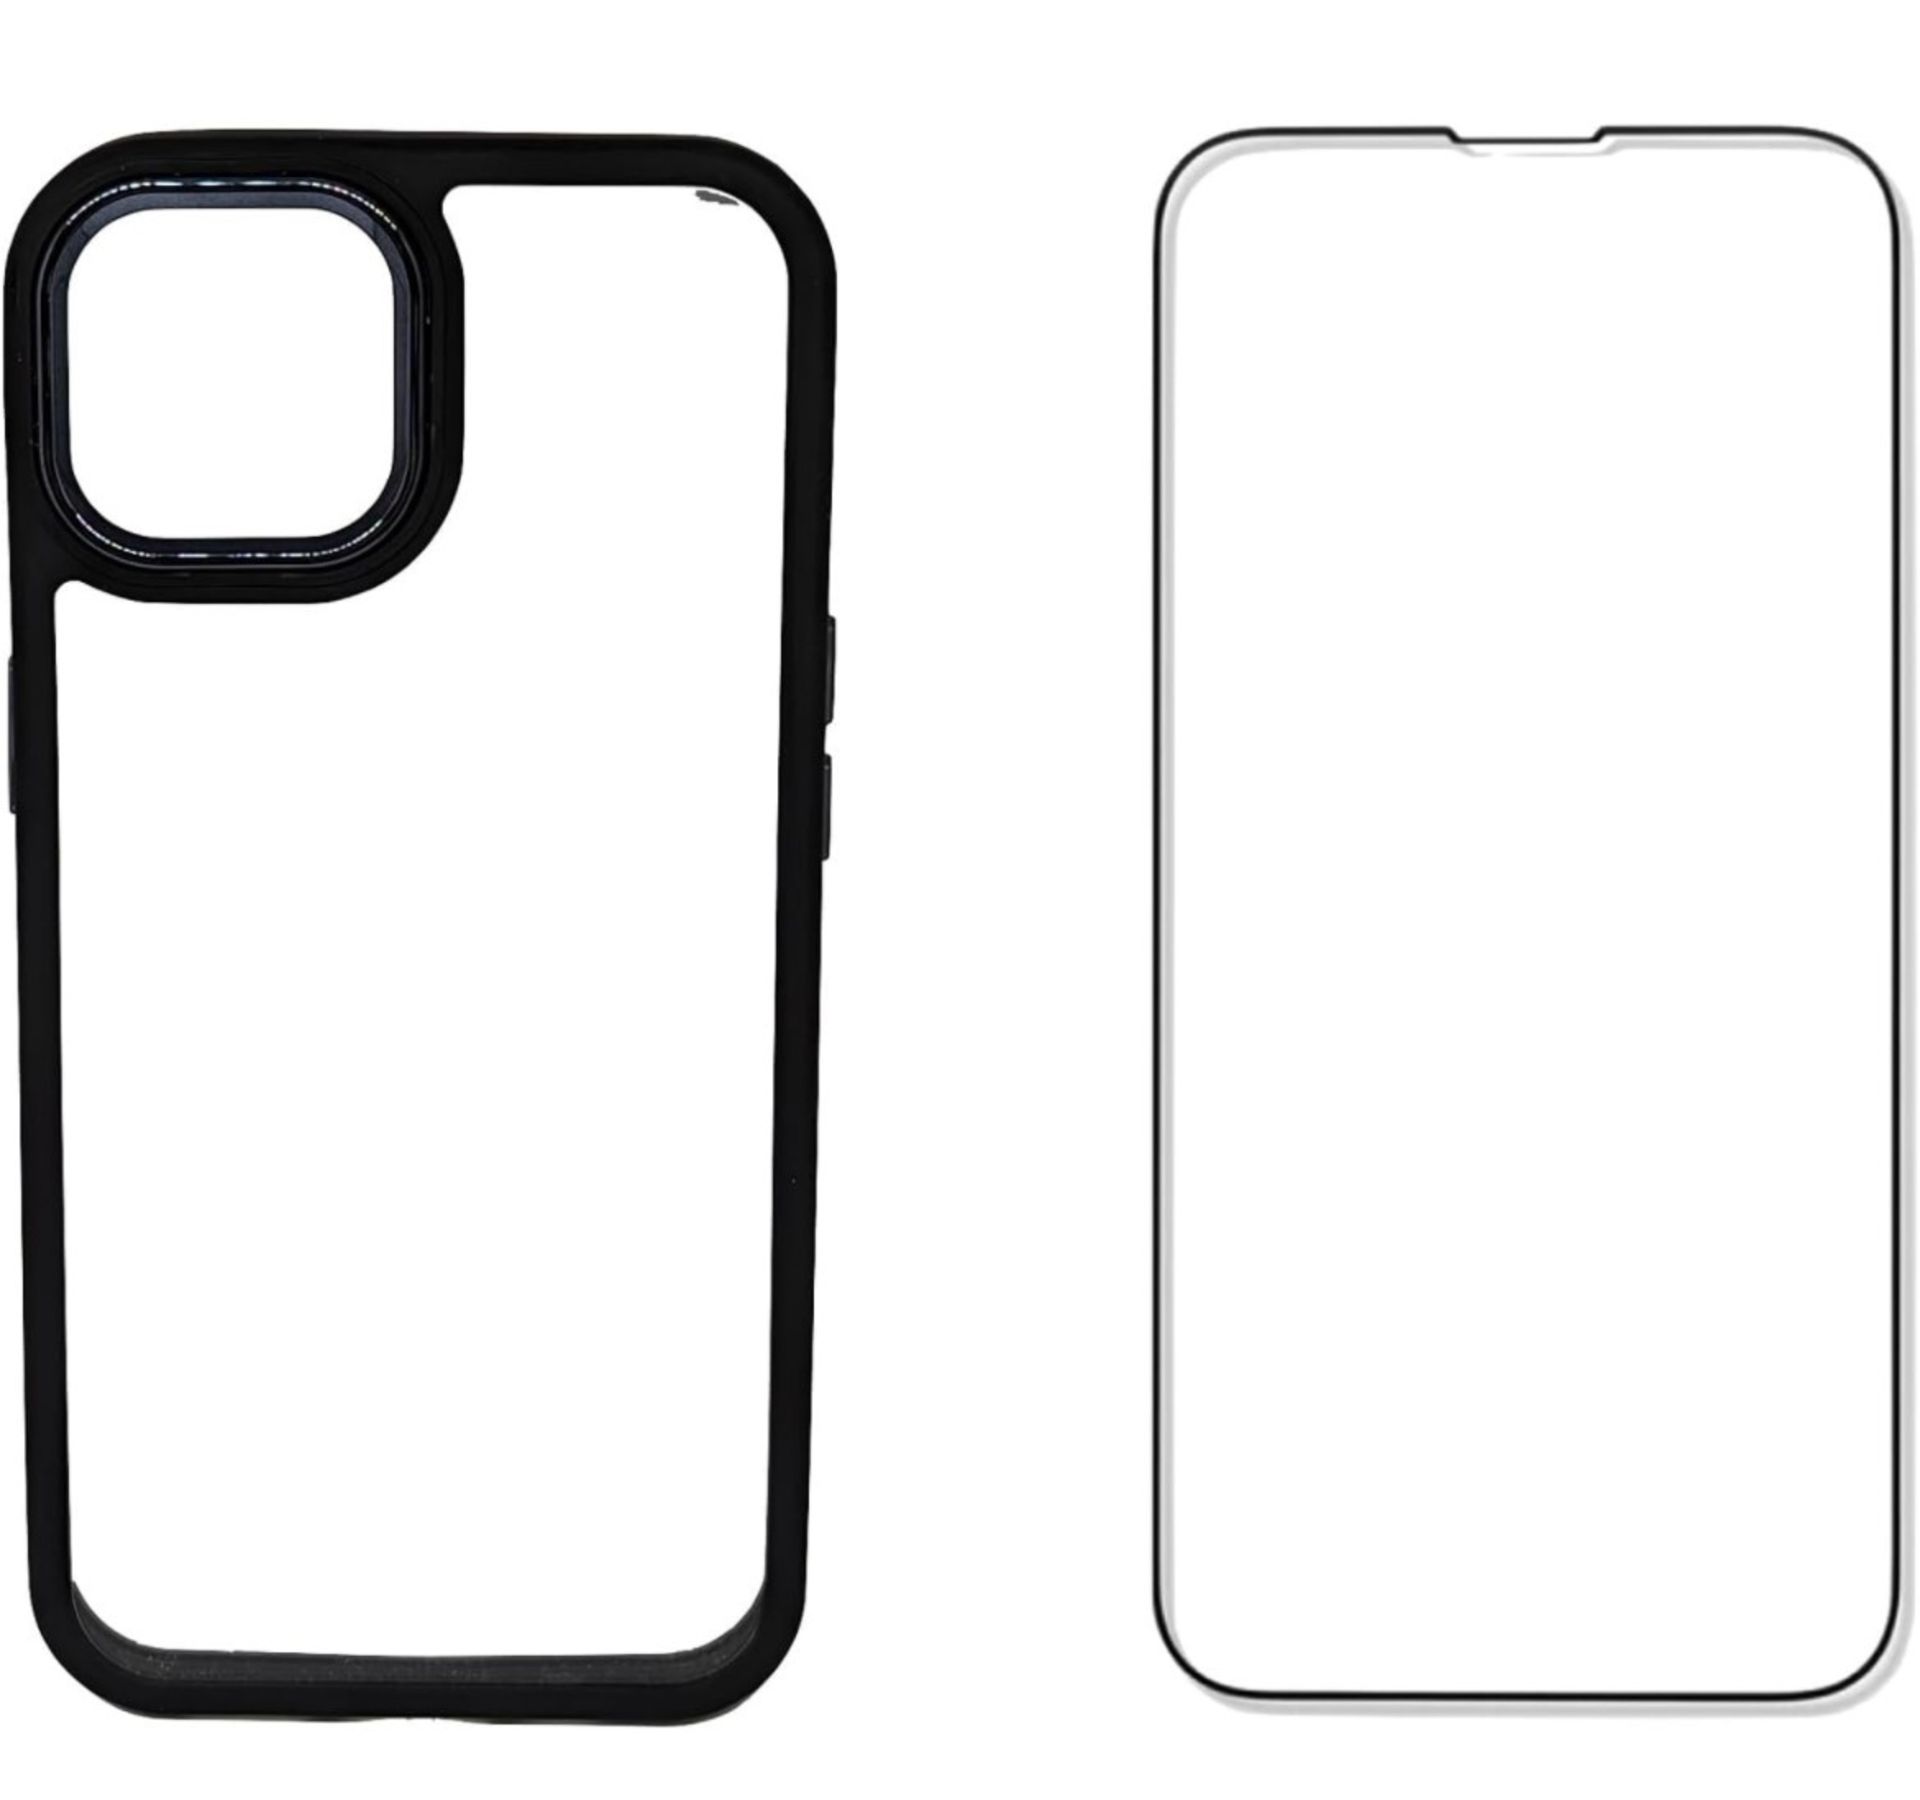 Set Of 10 X Black iPhone 15 Covers With Glass ScreensÊ - Image 2 of 2